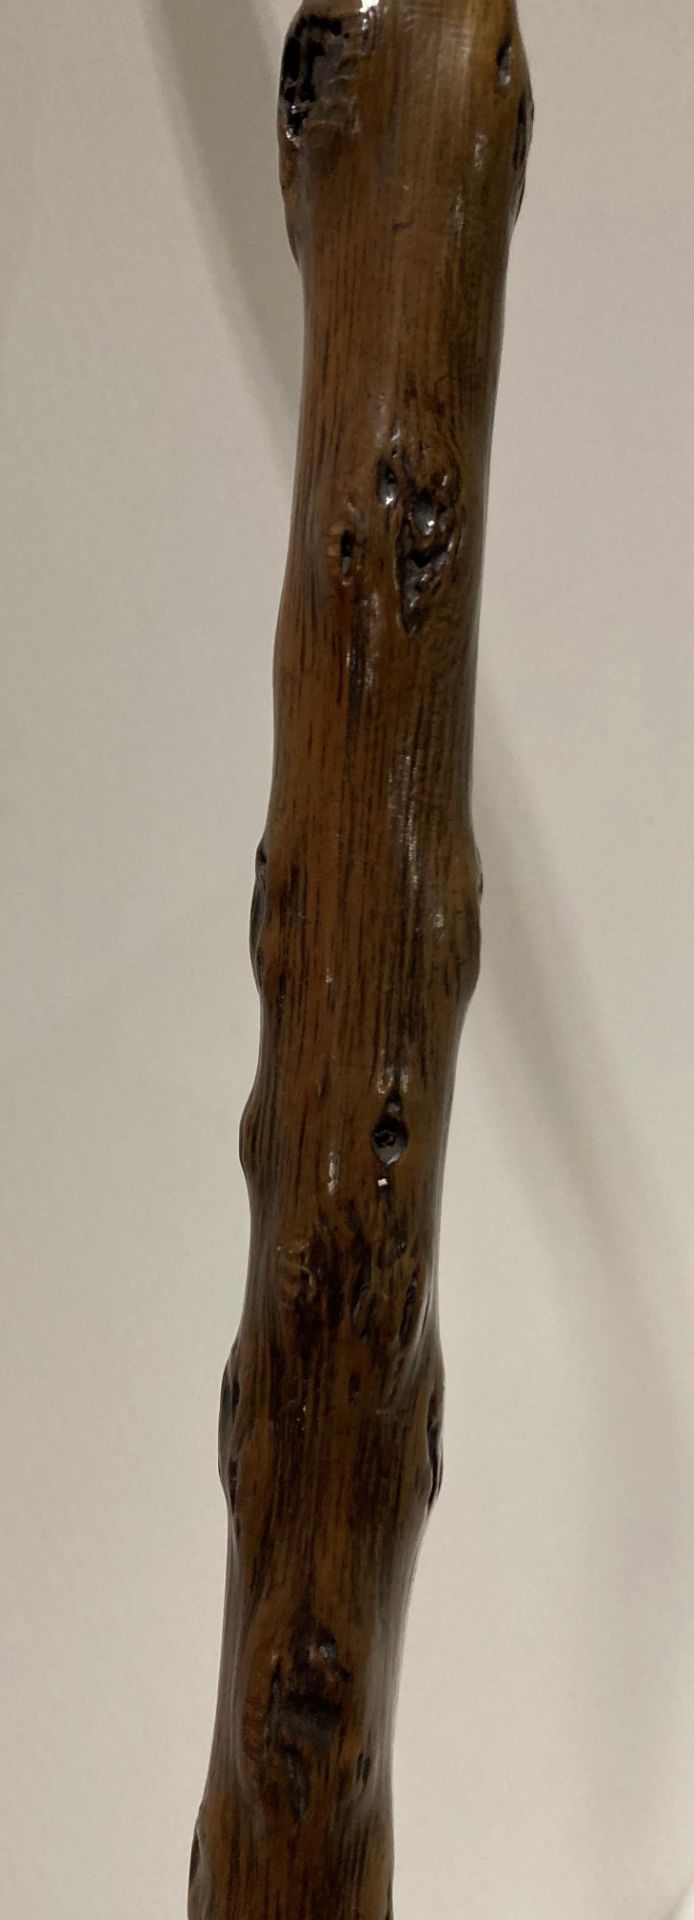 Brown wooden hand made walking stick with silver collar and a resin hand-carved acorn and leaf - Image 4 of 4